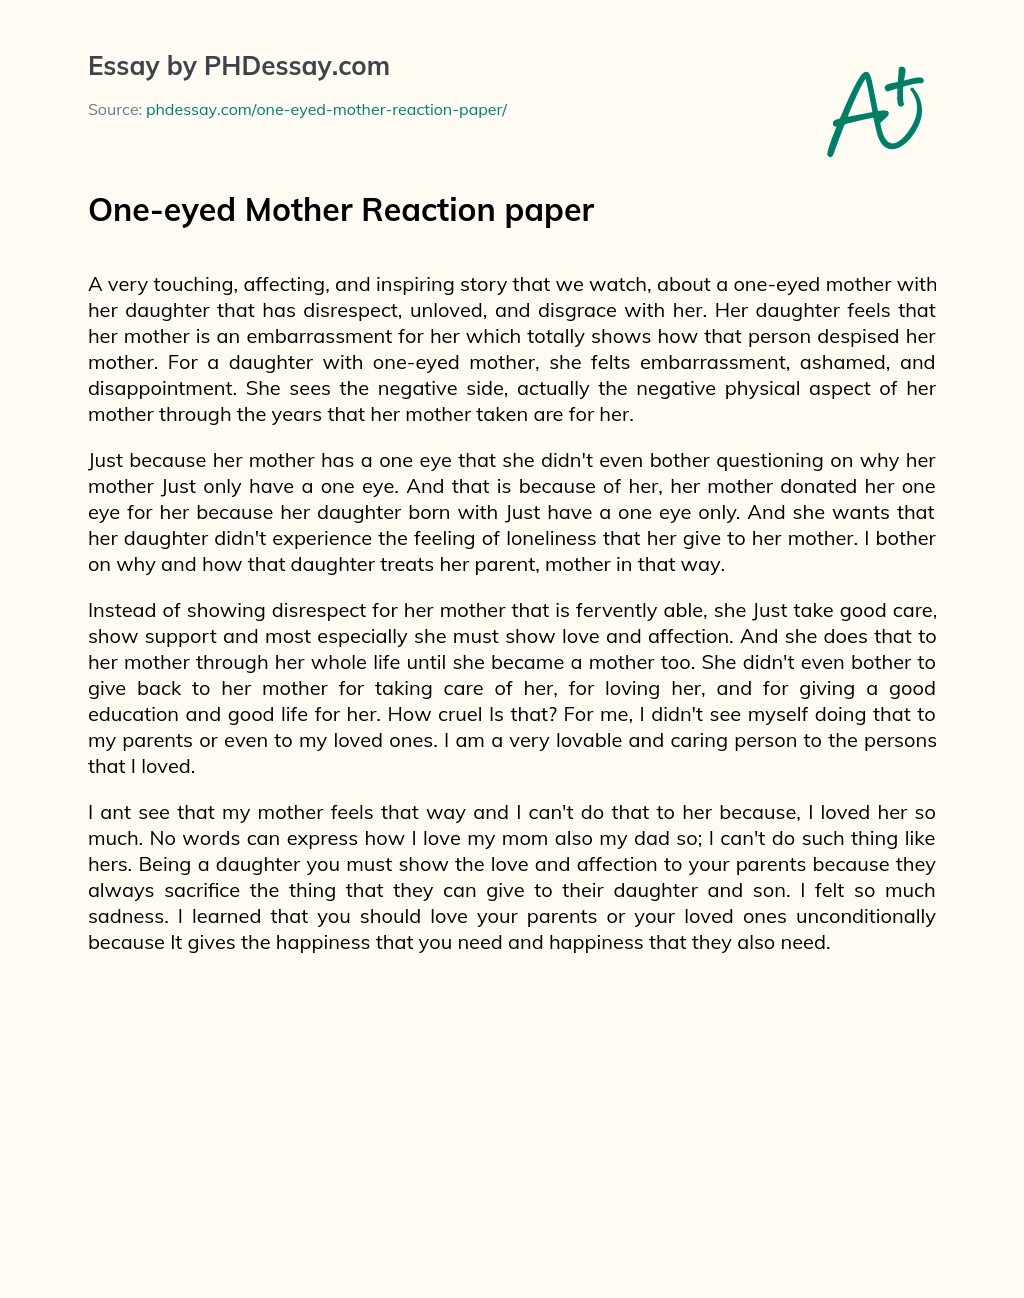 One-eyed Mother Reaction paper essay